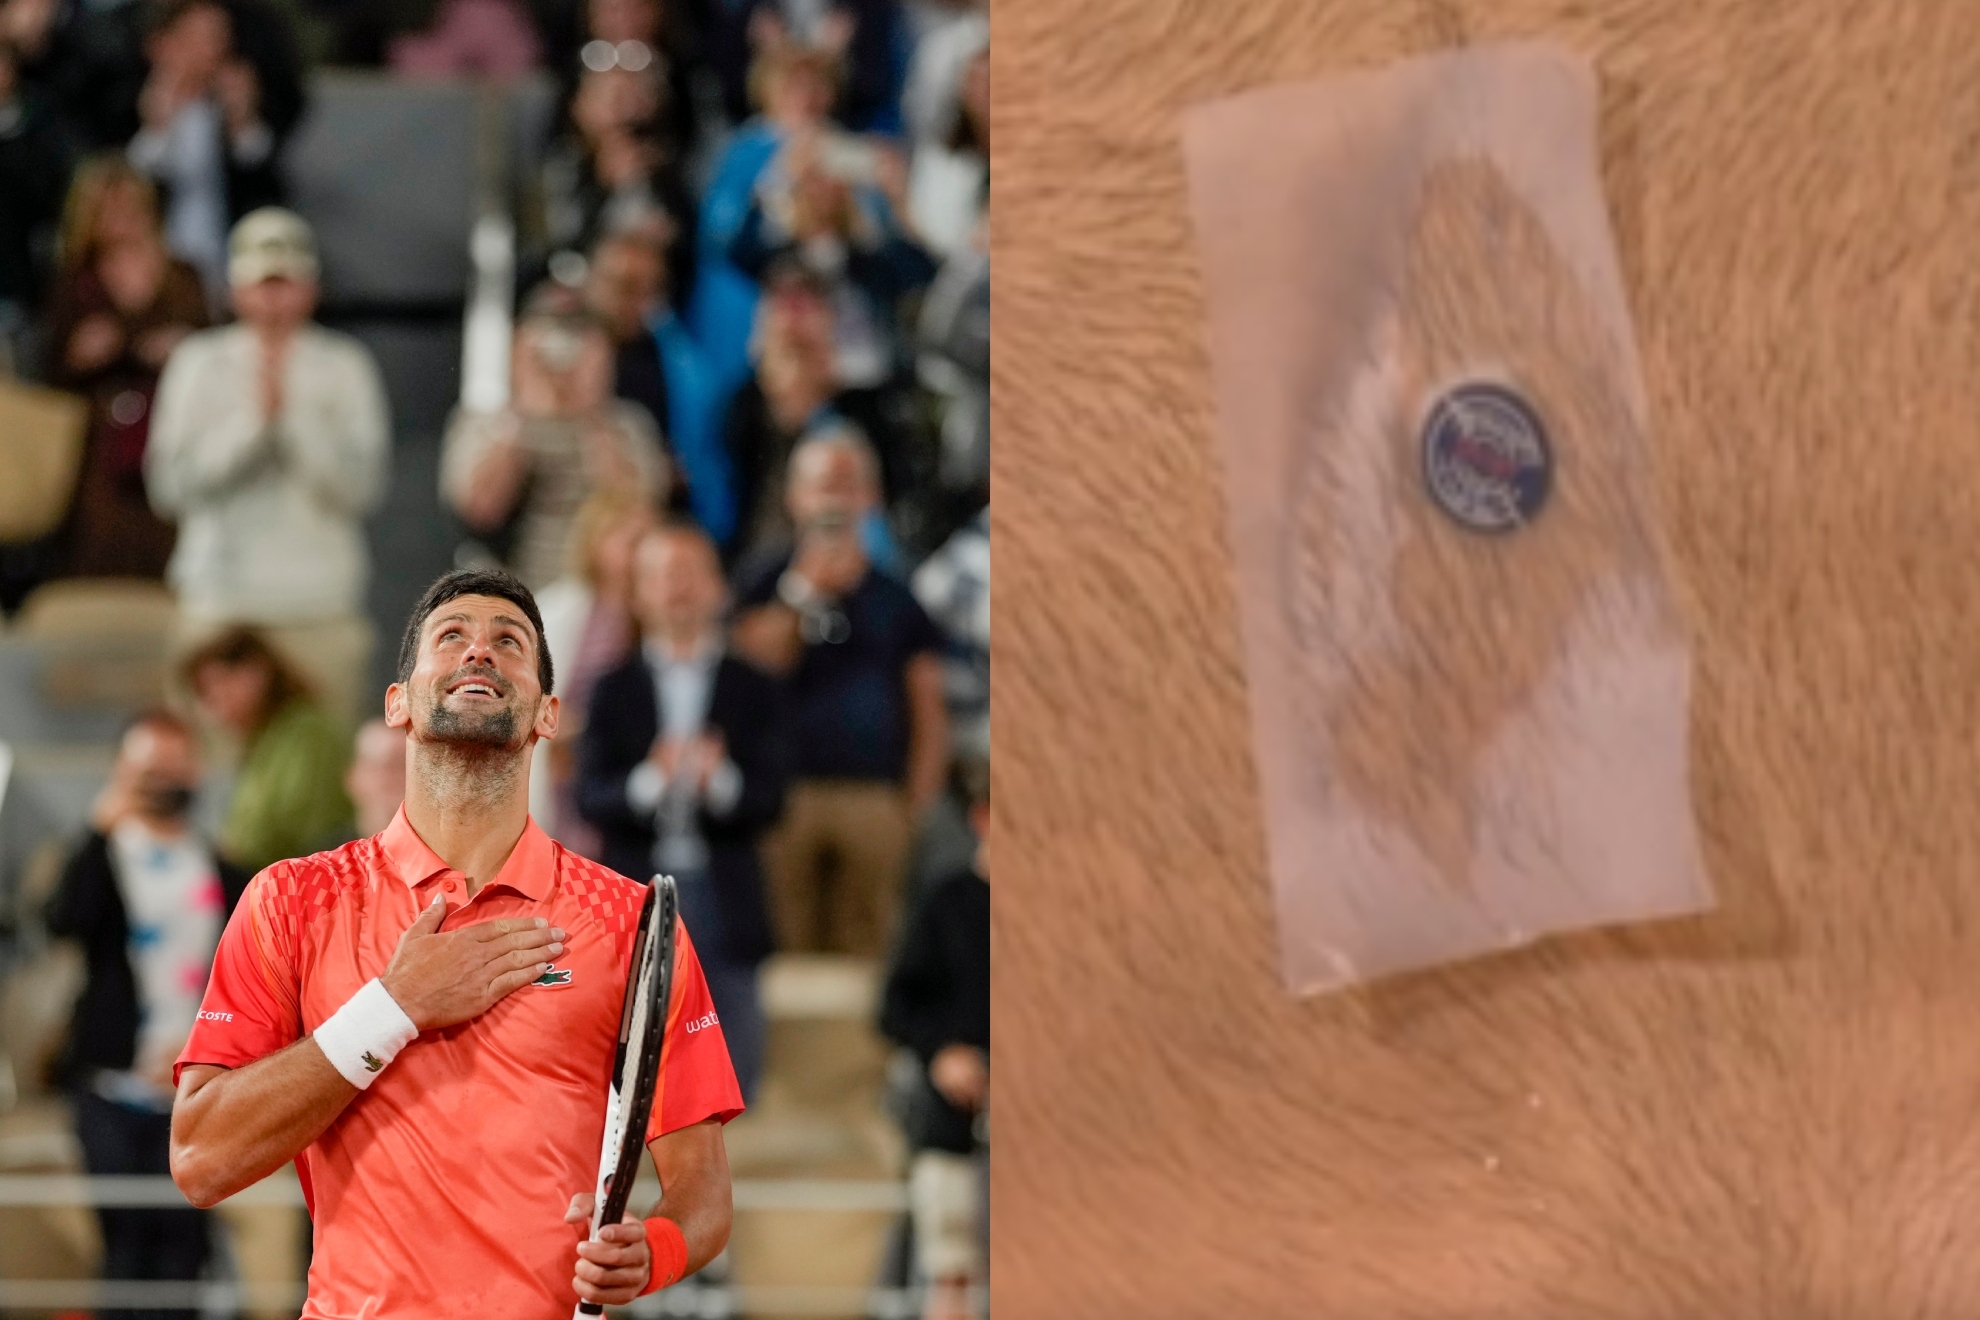 Djokovic and the chip on his chest.